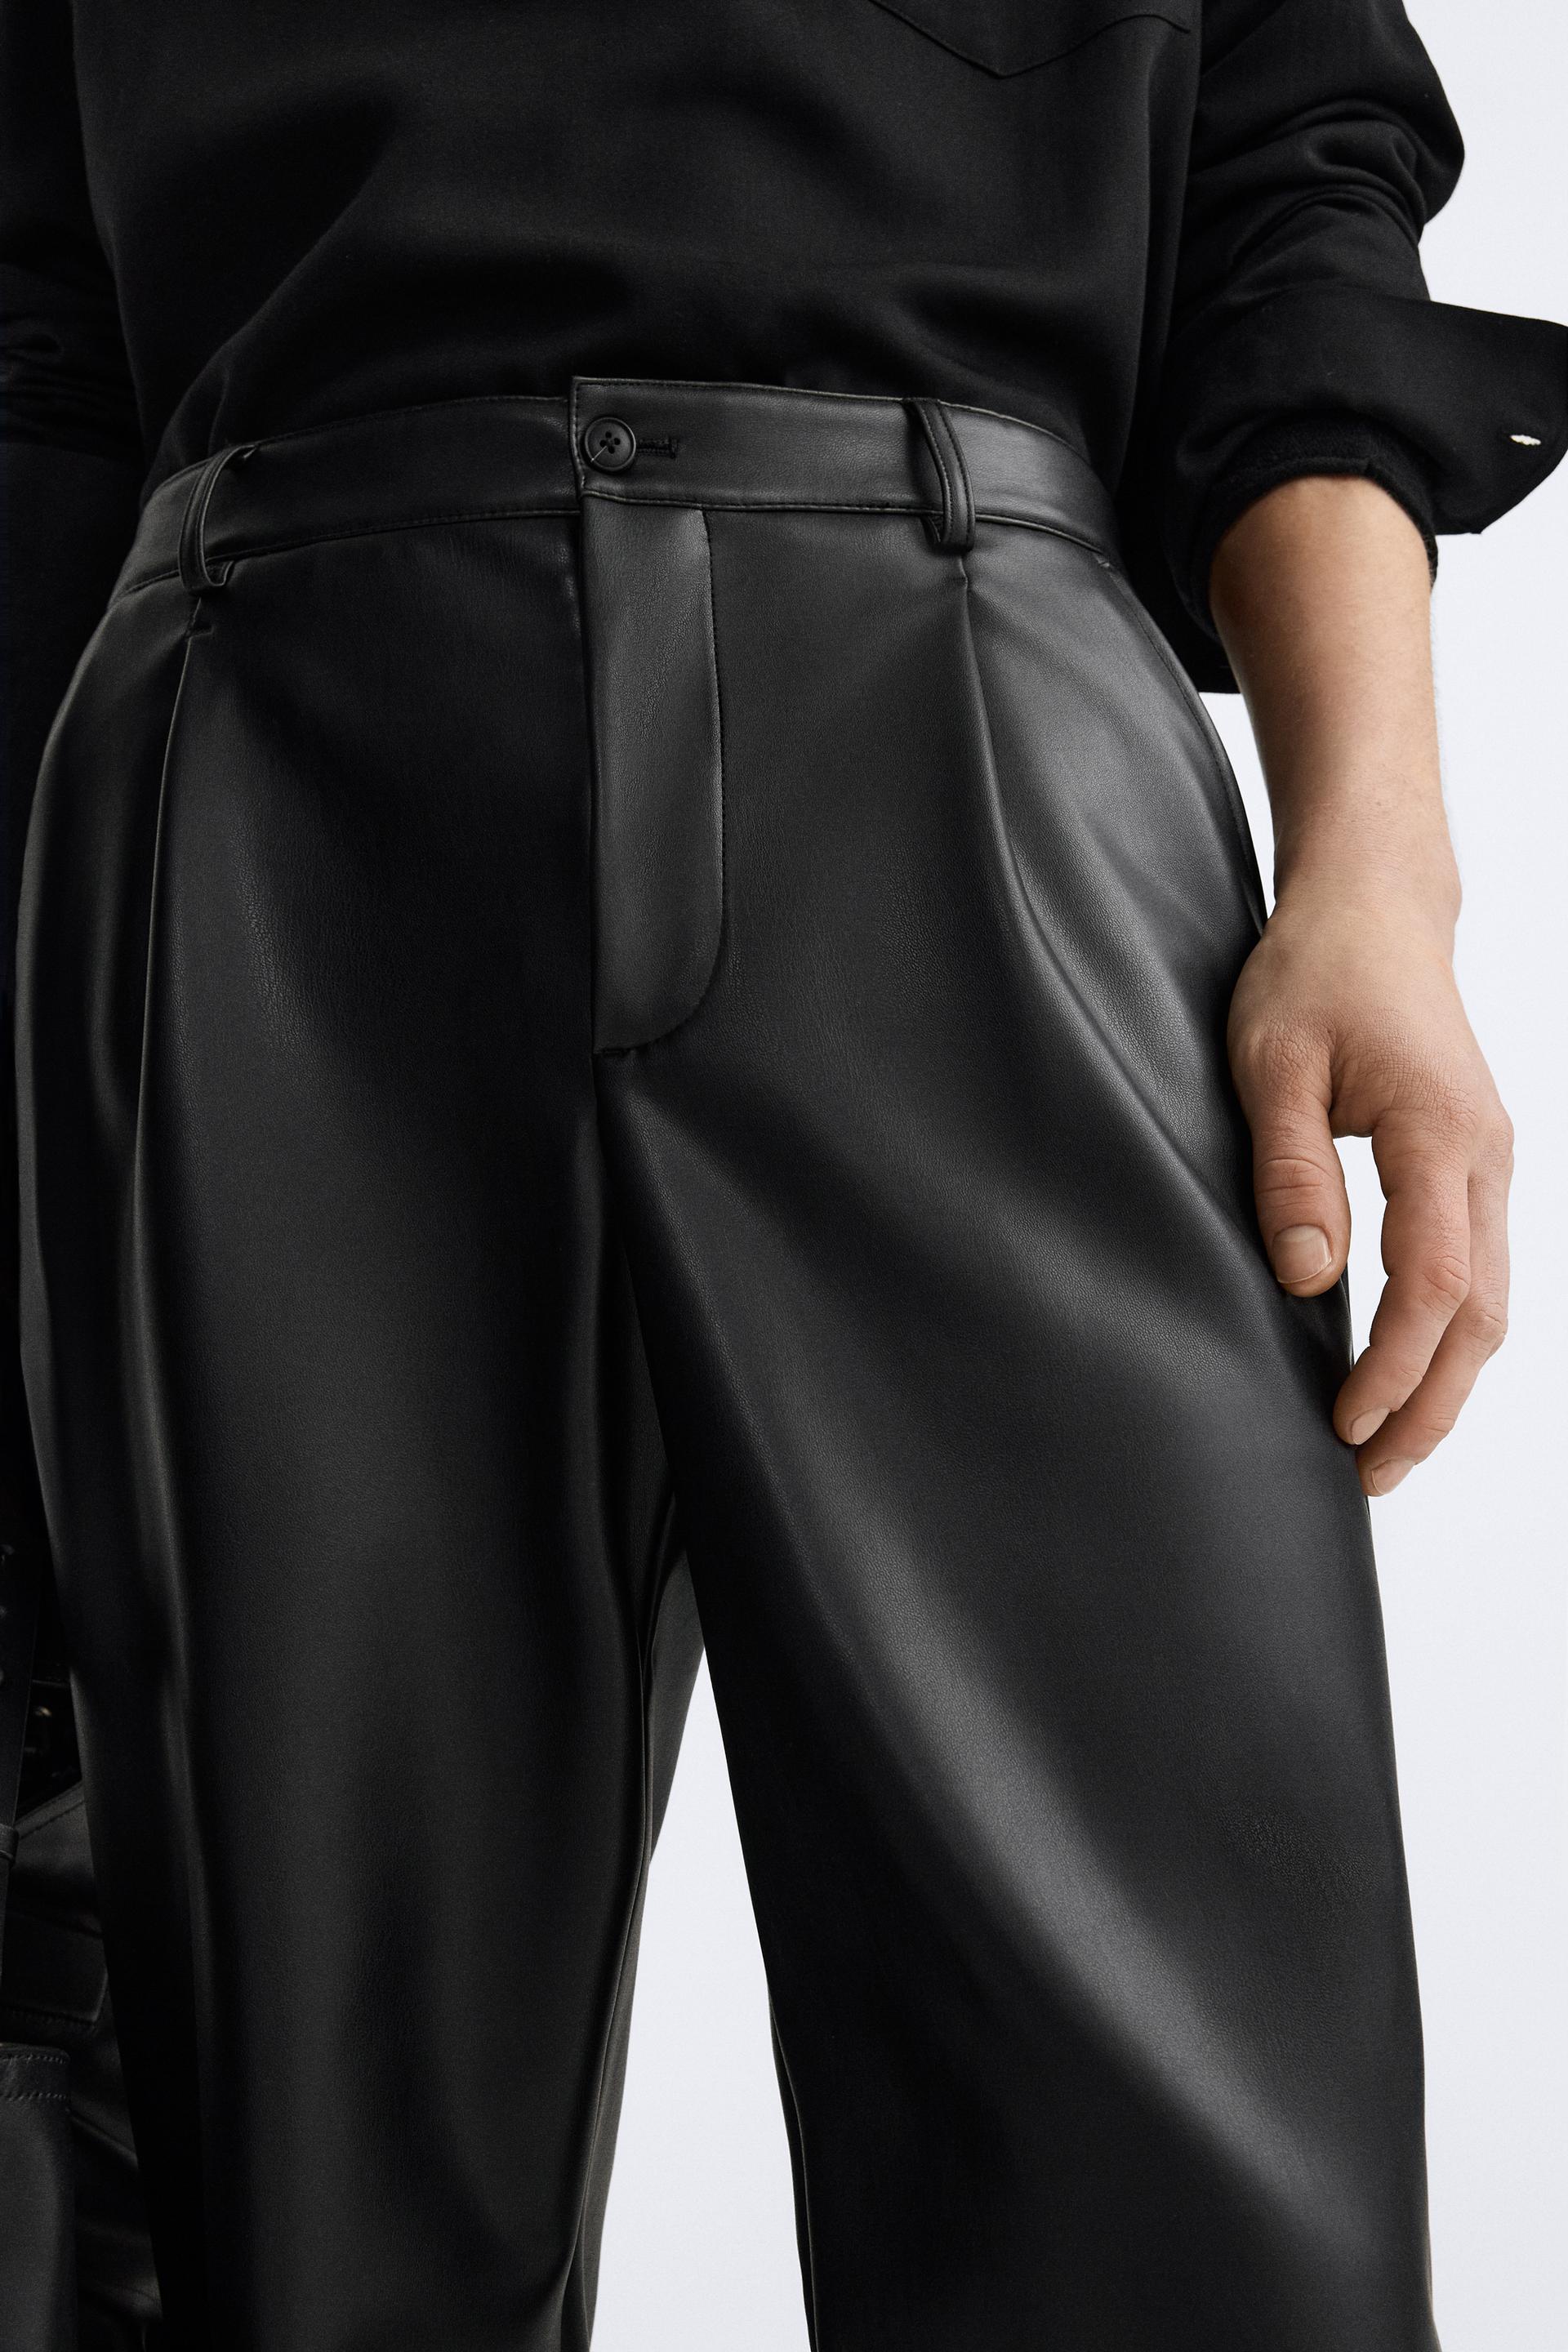 ZARA faux leather pants full length Black - $23 (58% Off Retail) - From  Natalie